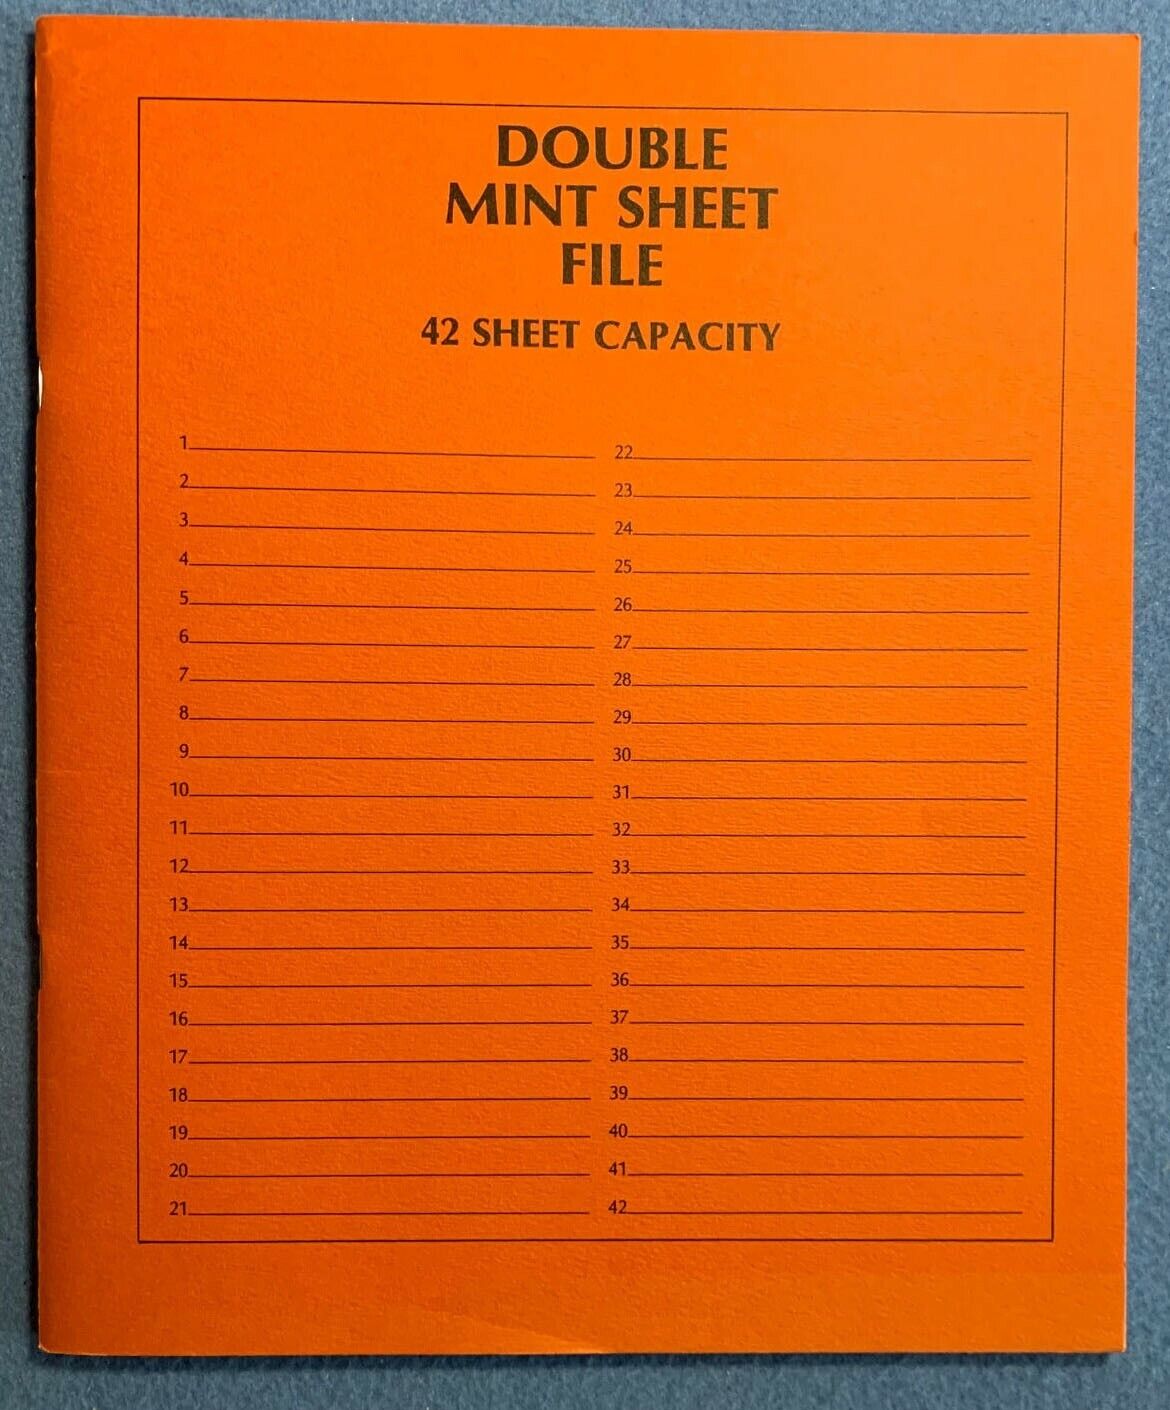 Double Mint Sheet File - 42 sheet capacity, 9.5x11.5" - superb cond